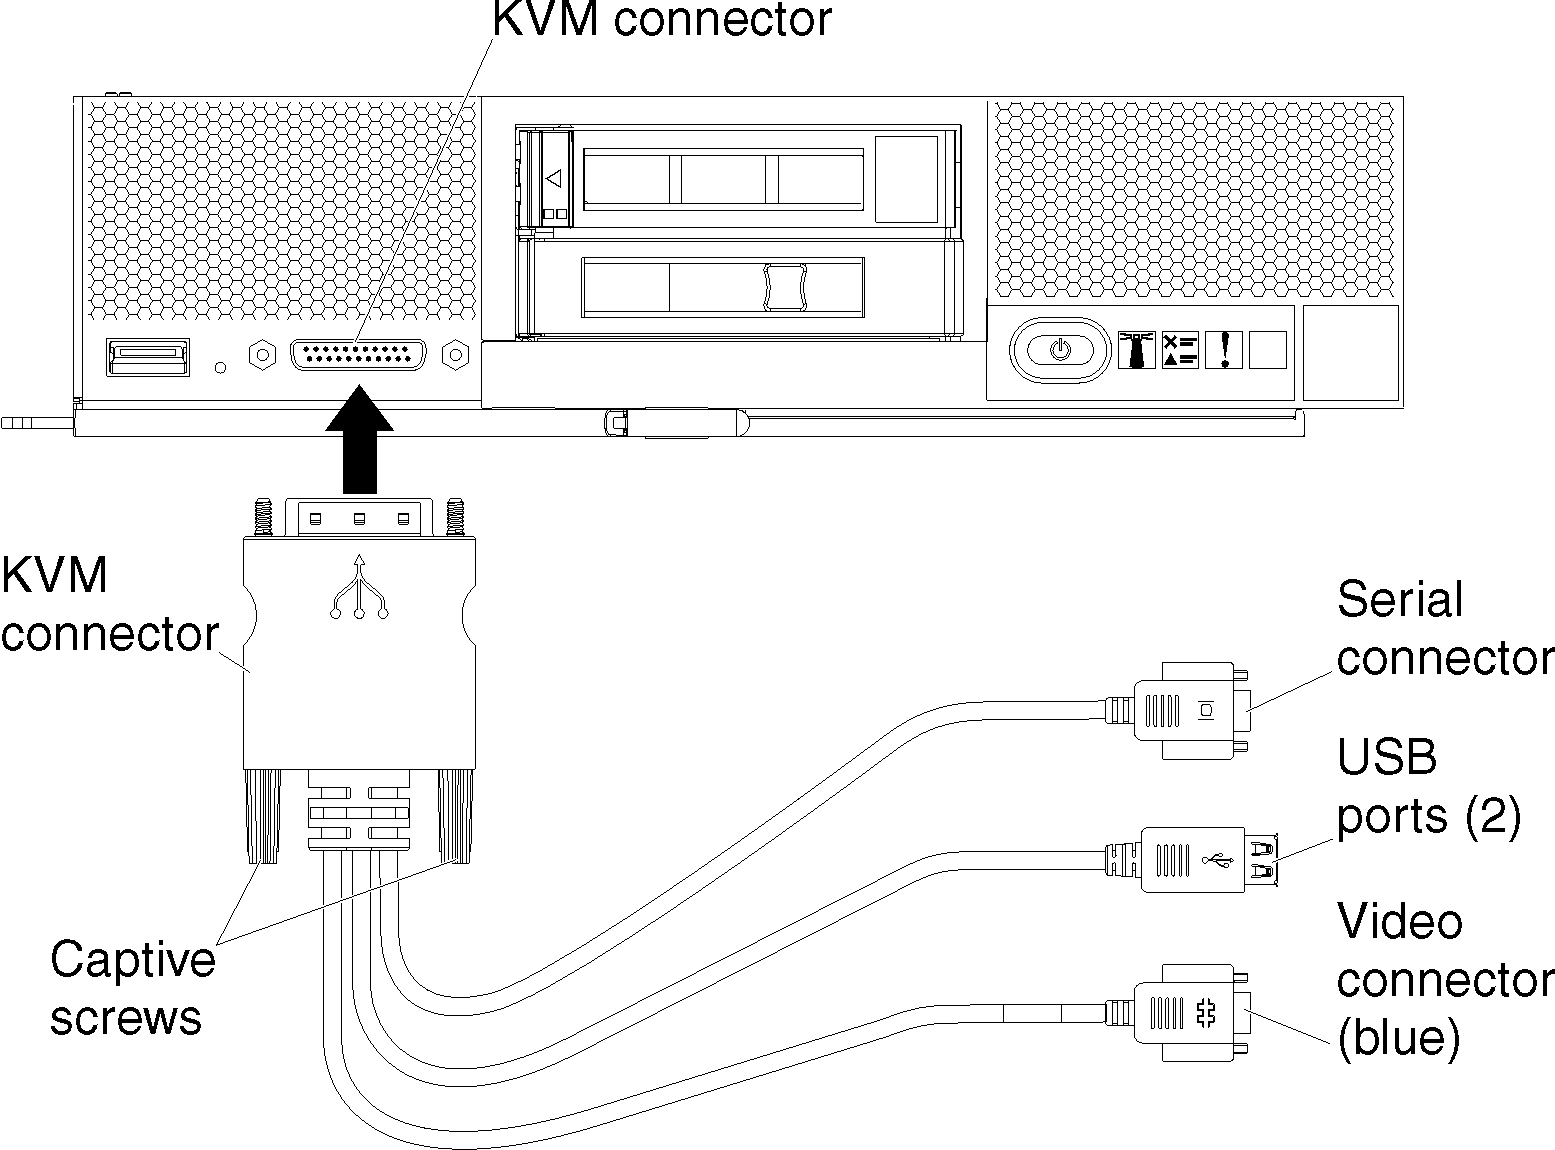 Illustrates the breakout cable connecting to a compute node